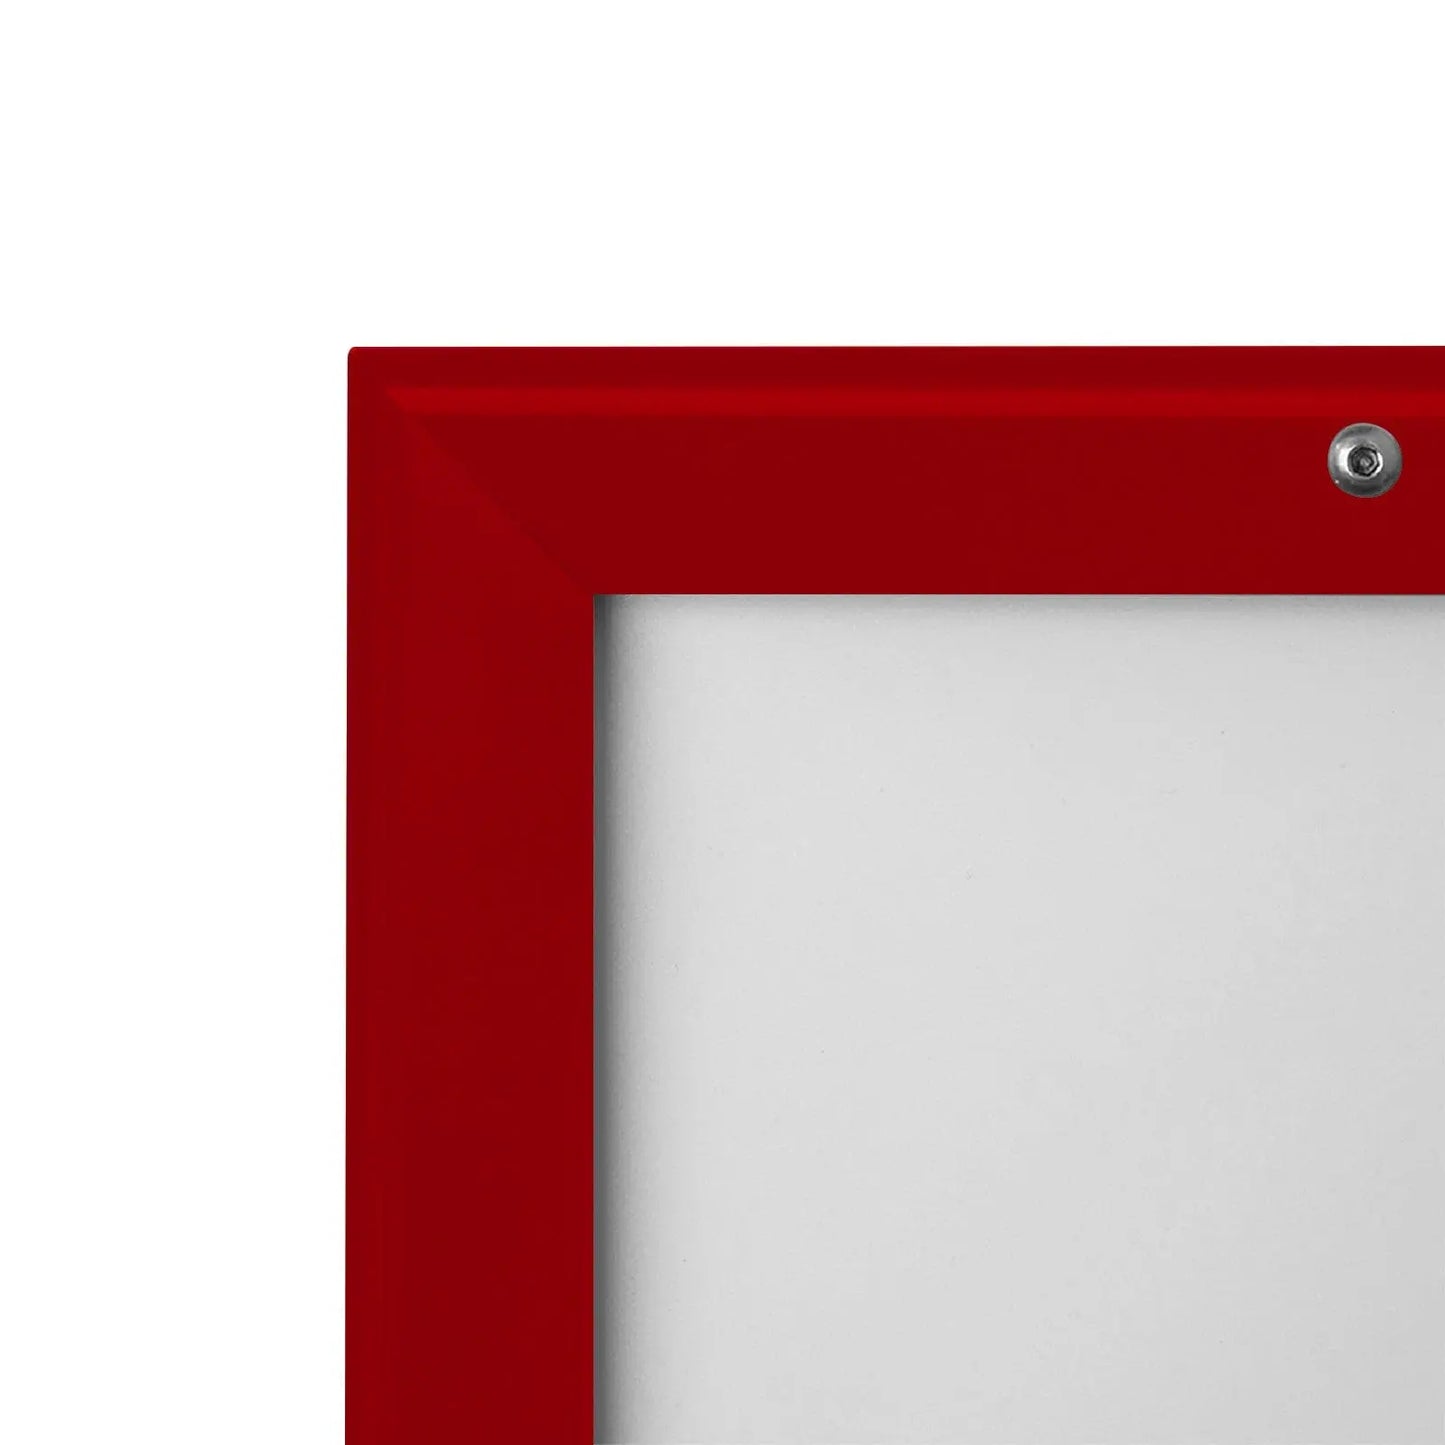 Red locking snap frame poster size 27X40 - 1.25 inch profile - Snap Frames Direct